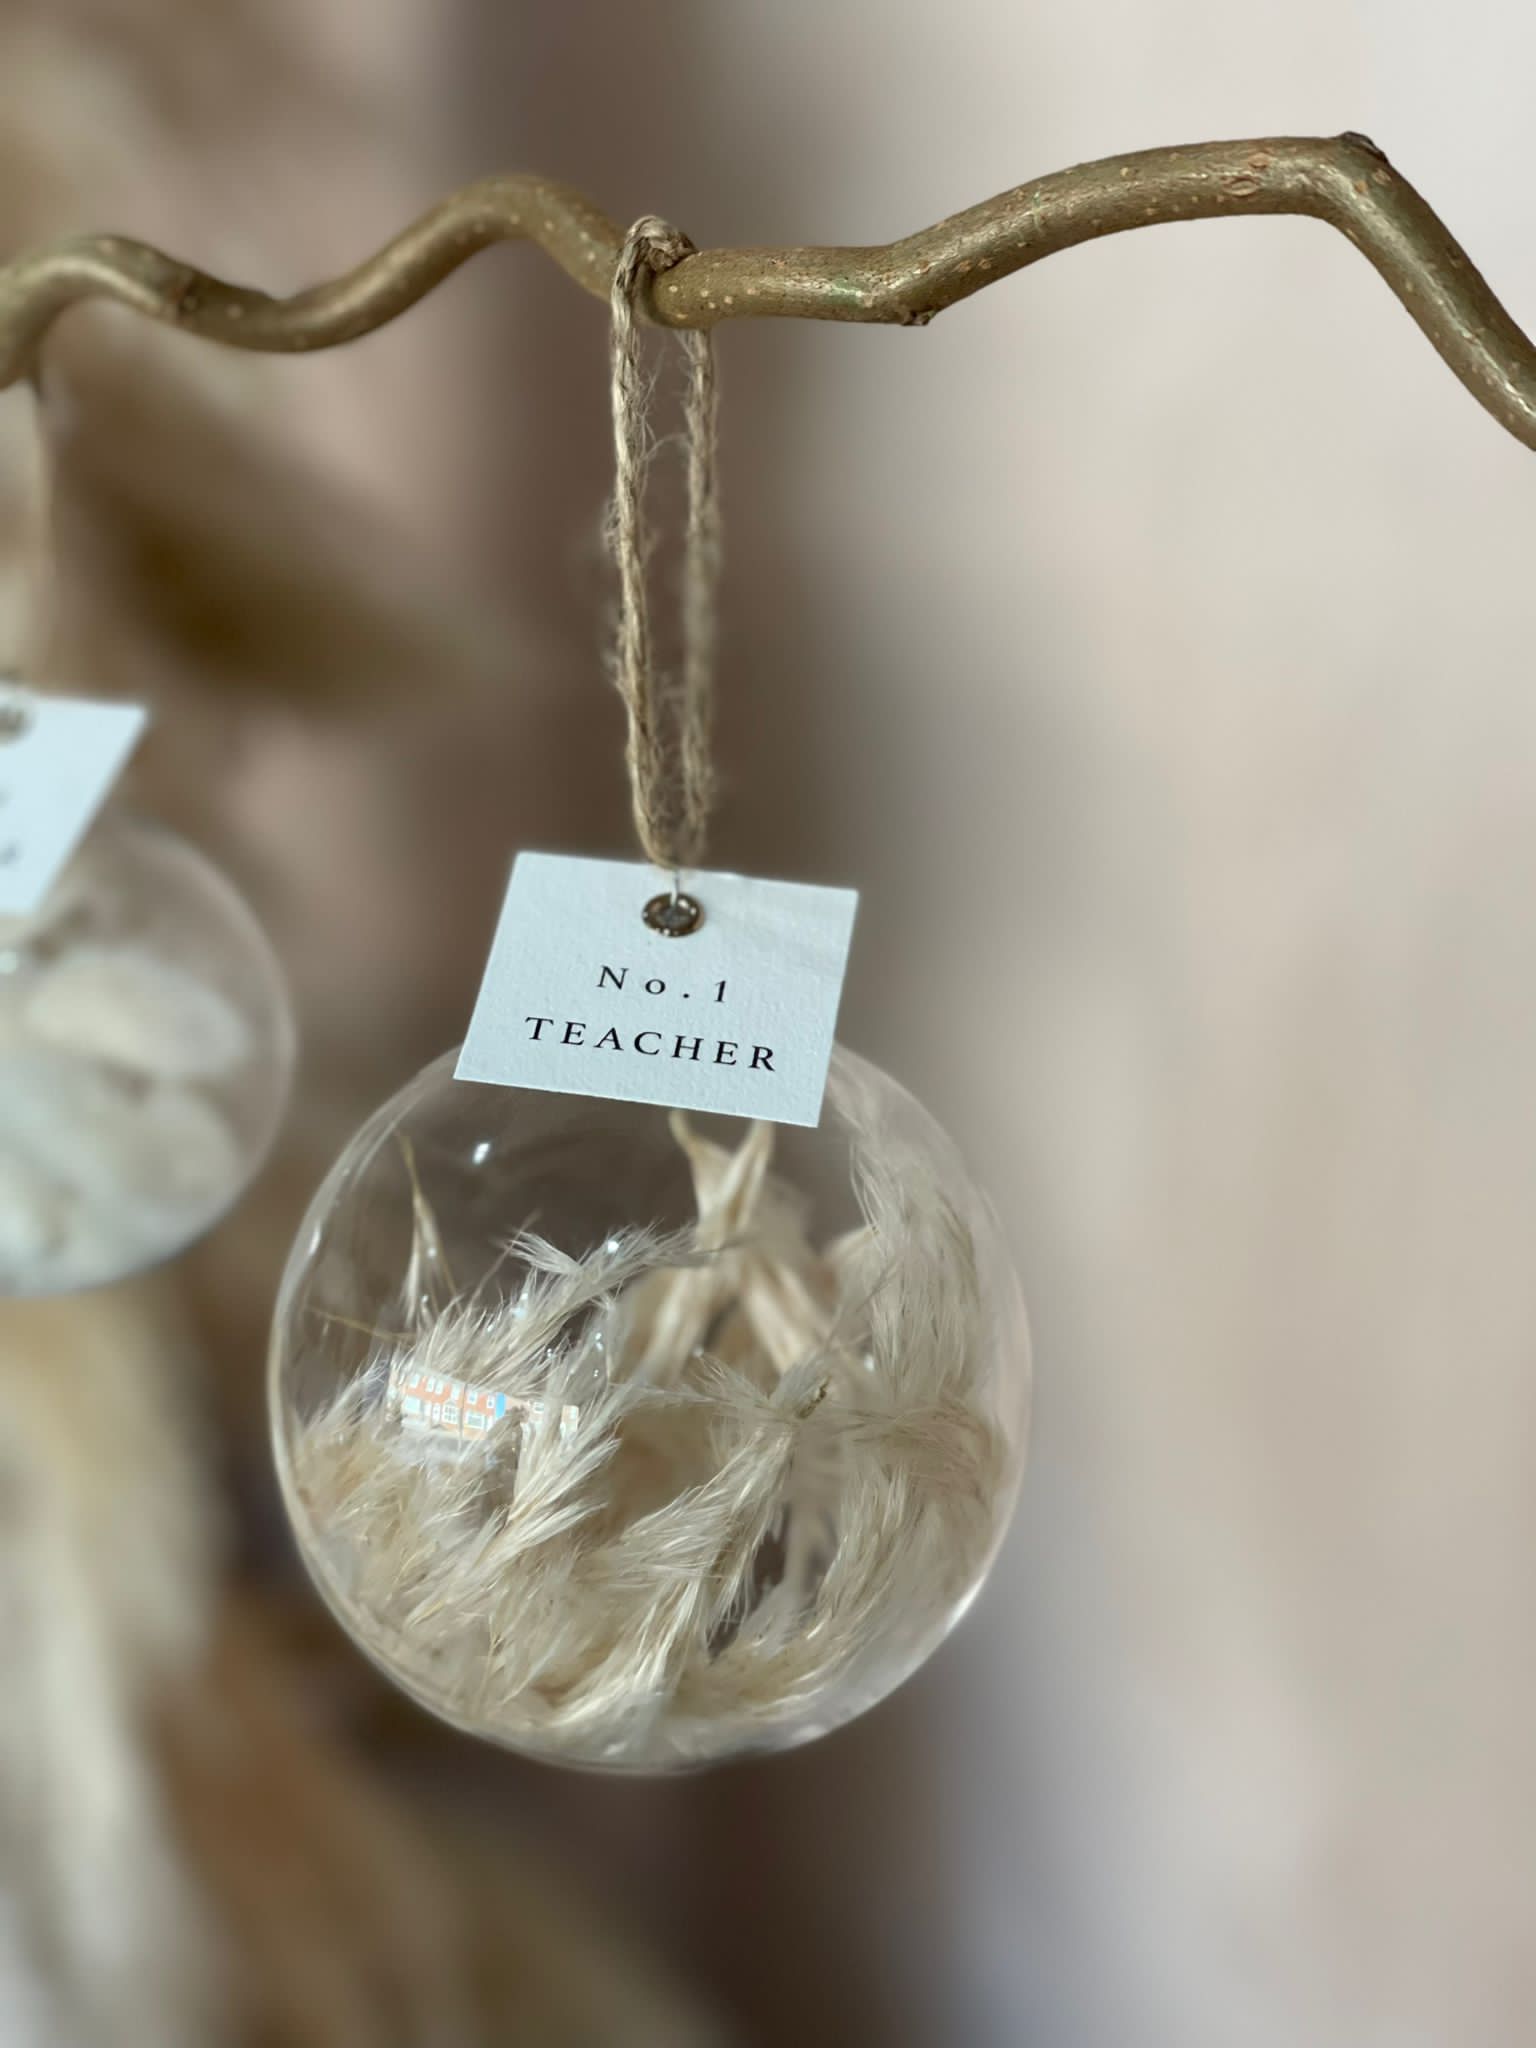 Large Dried Floral Bauble with No.1 teacher tag